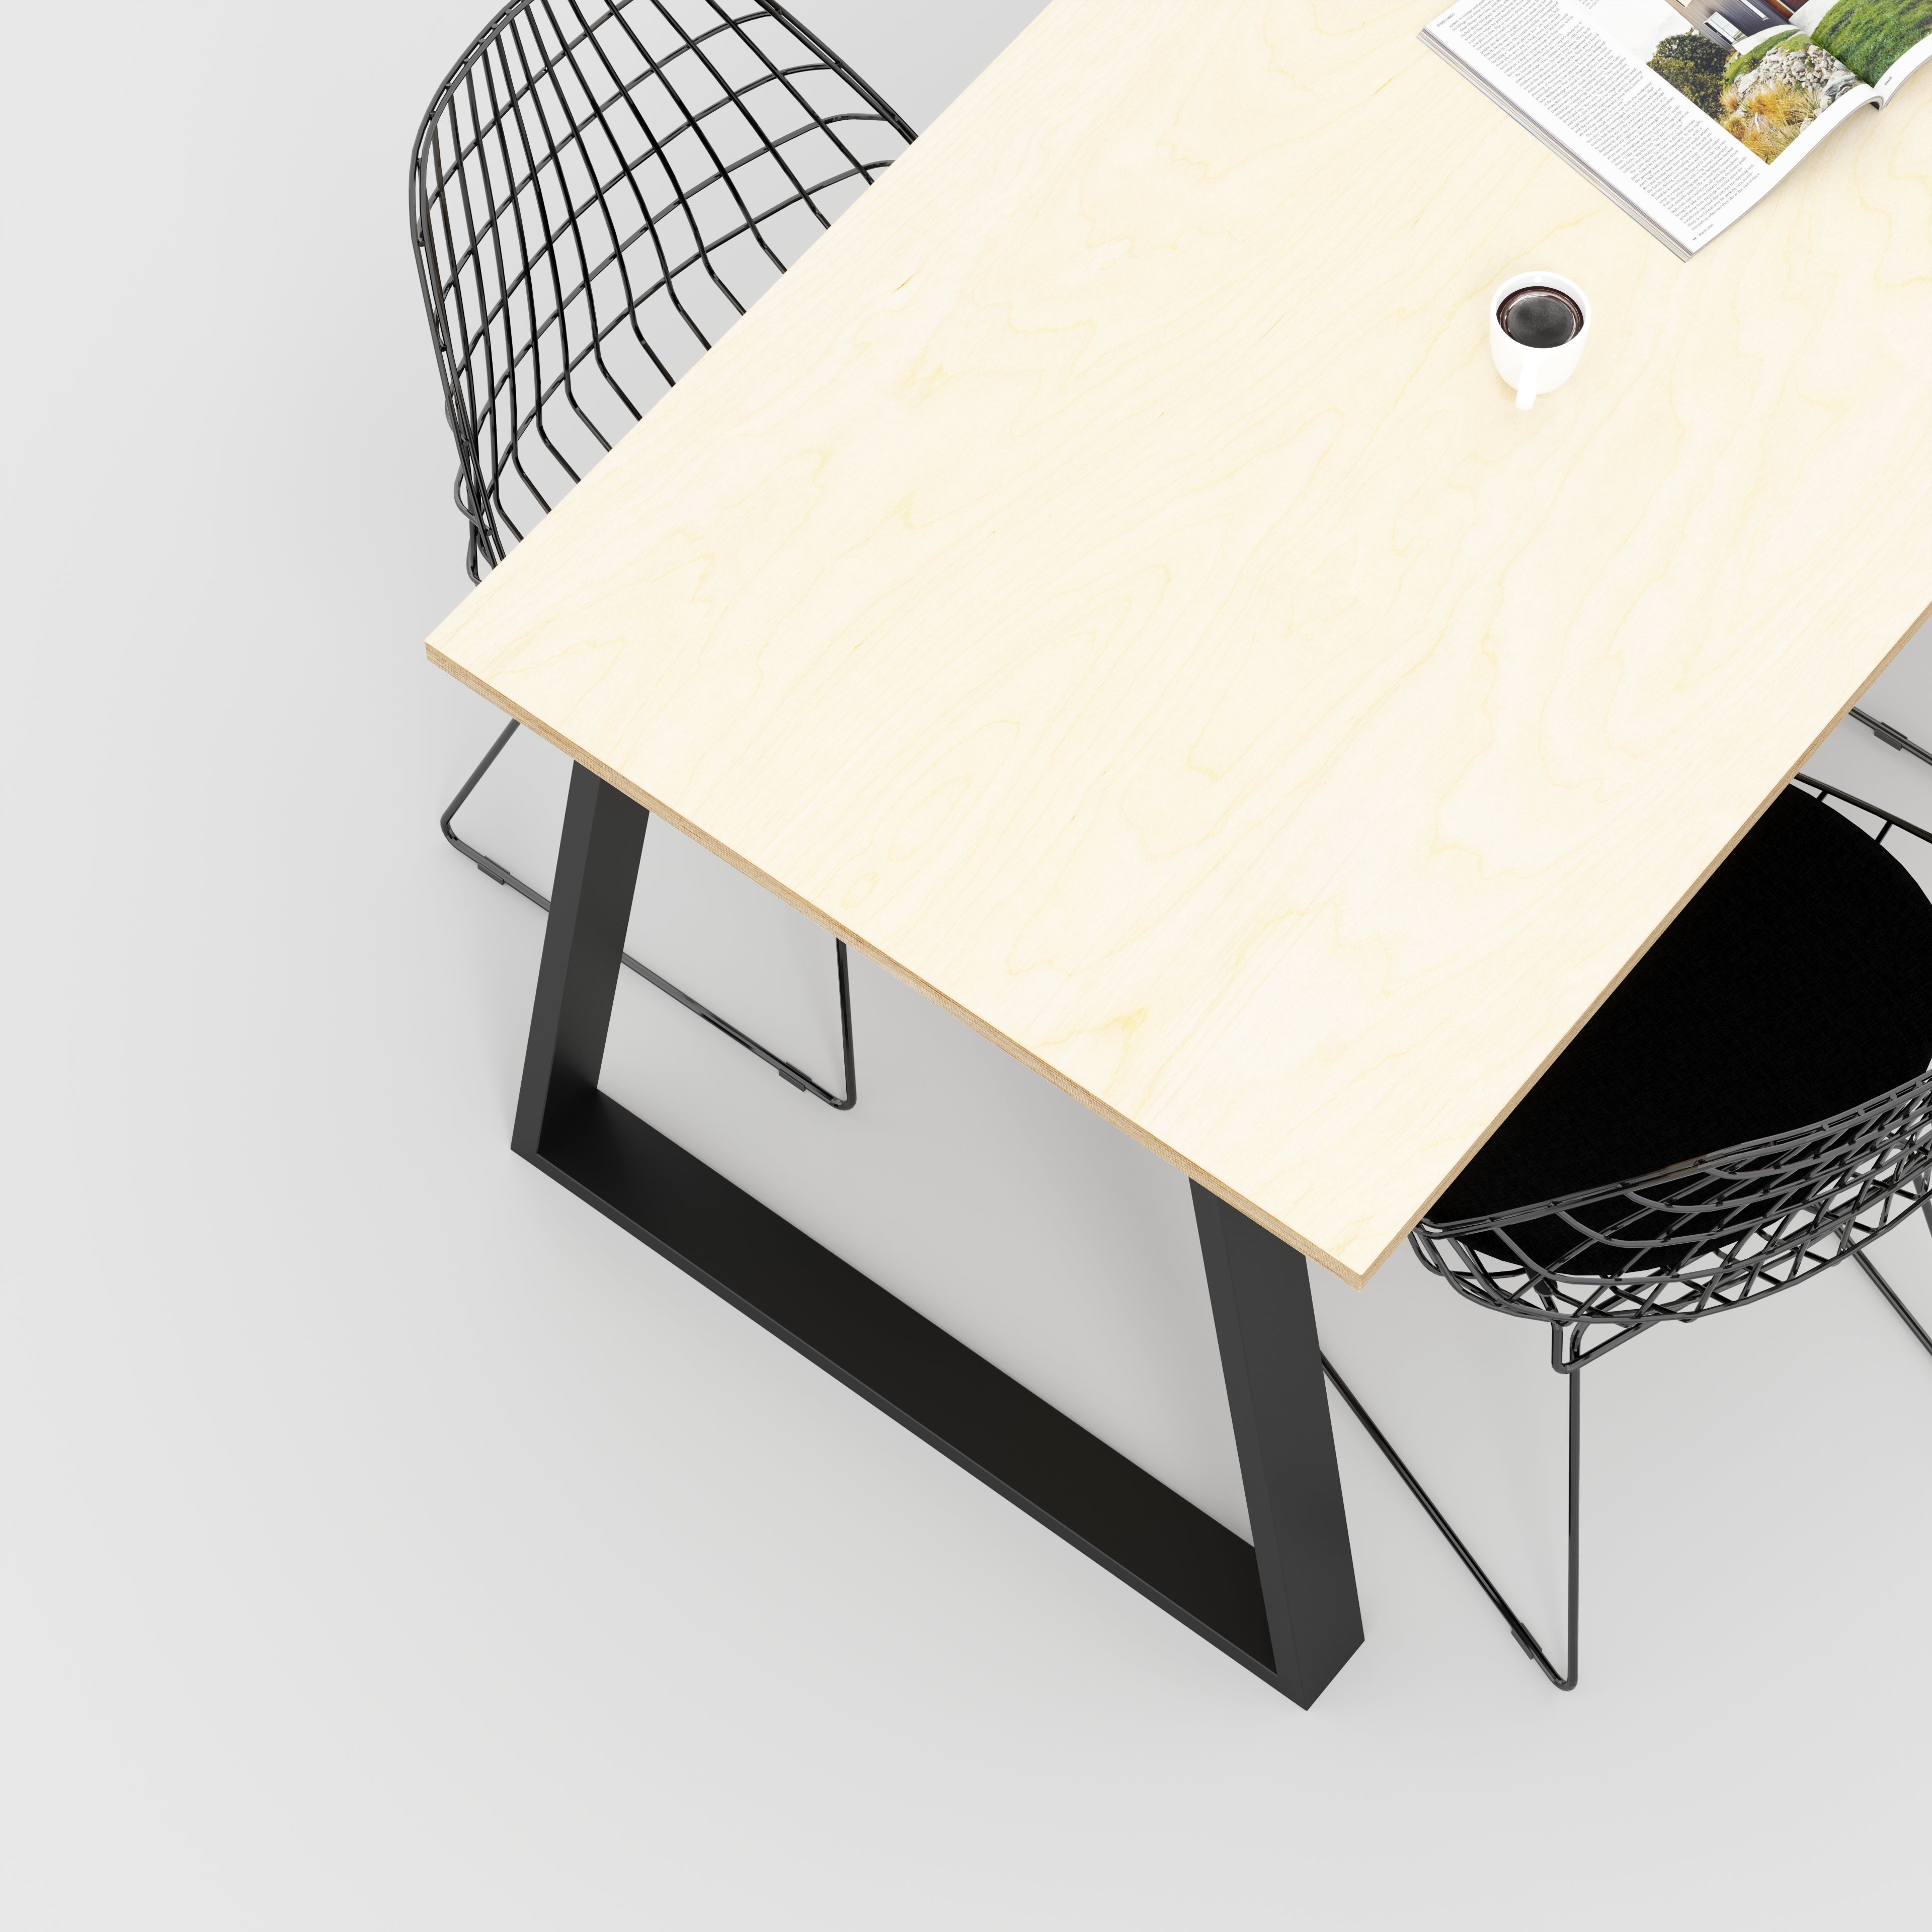 Custom Plywood Table with Trapezium Industrial Legs